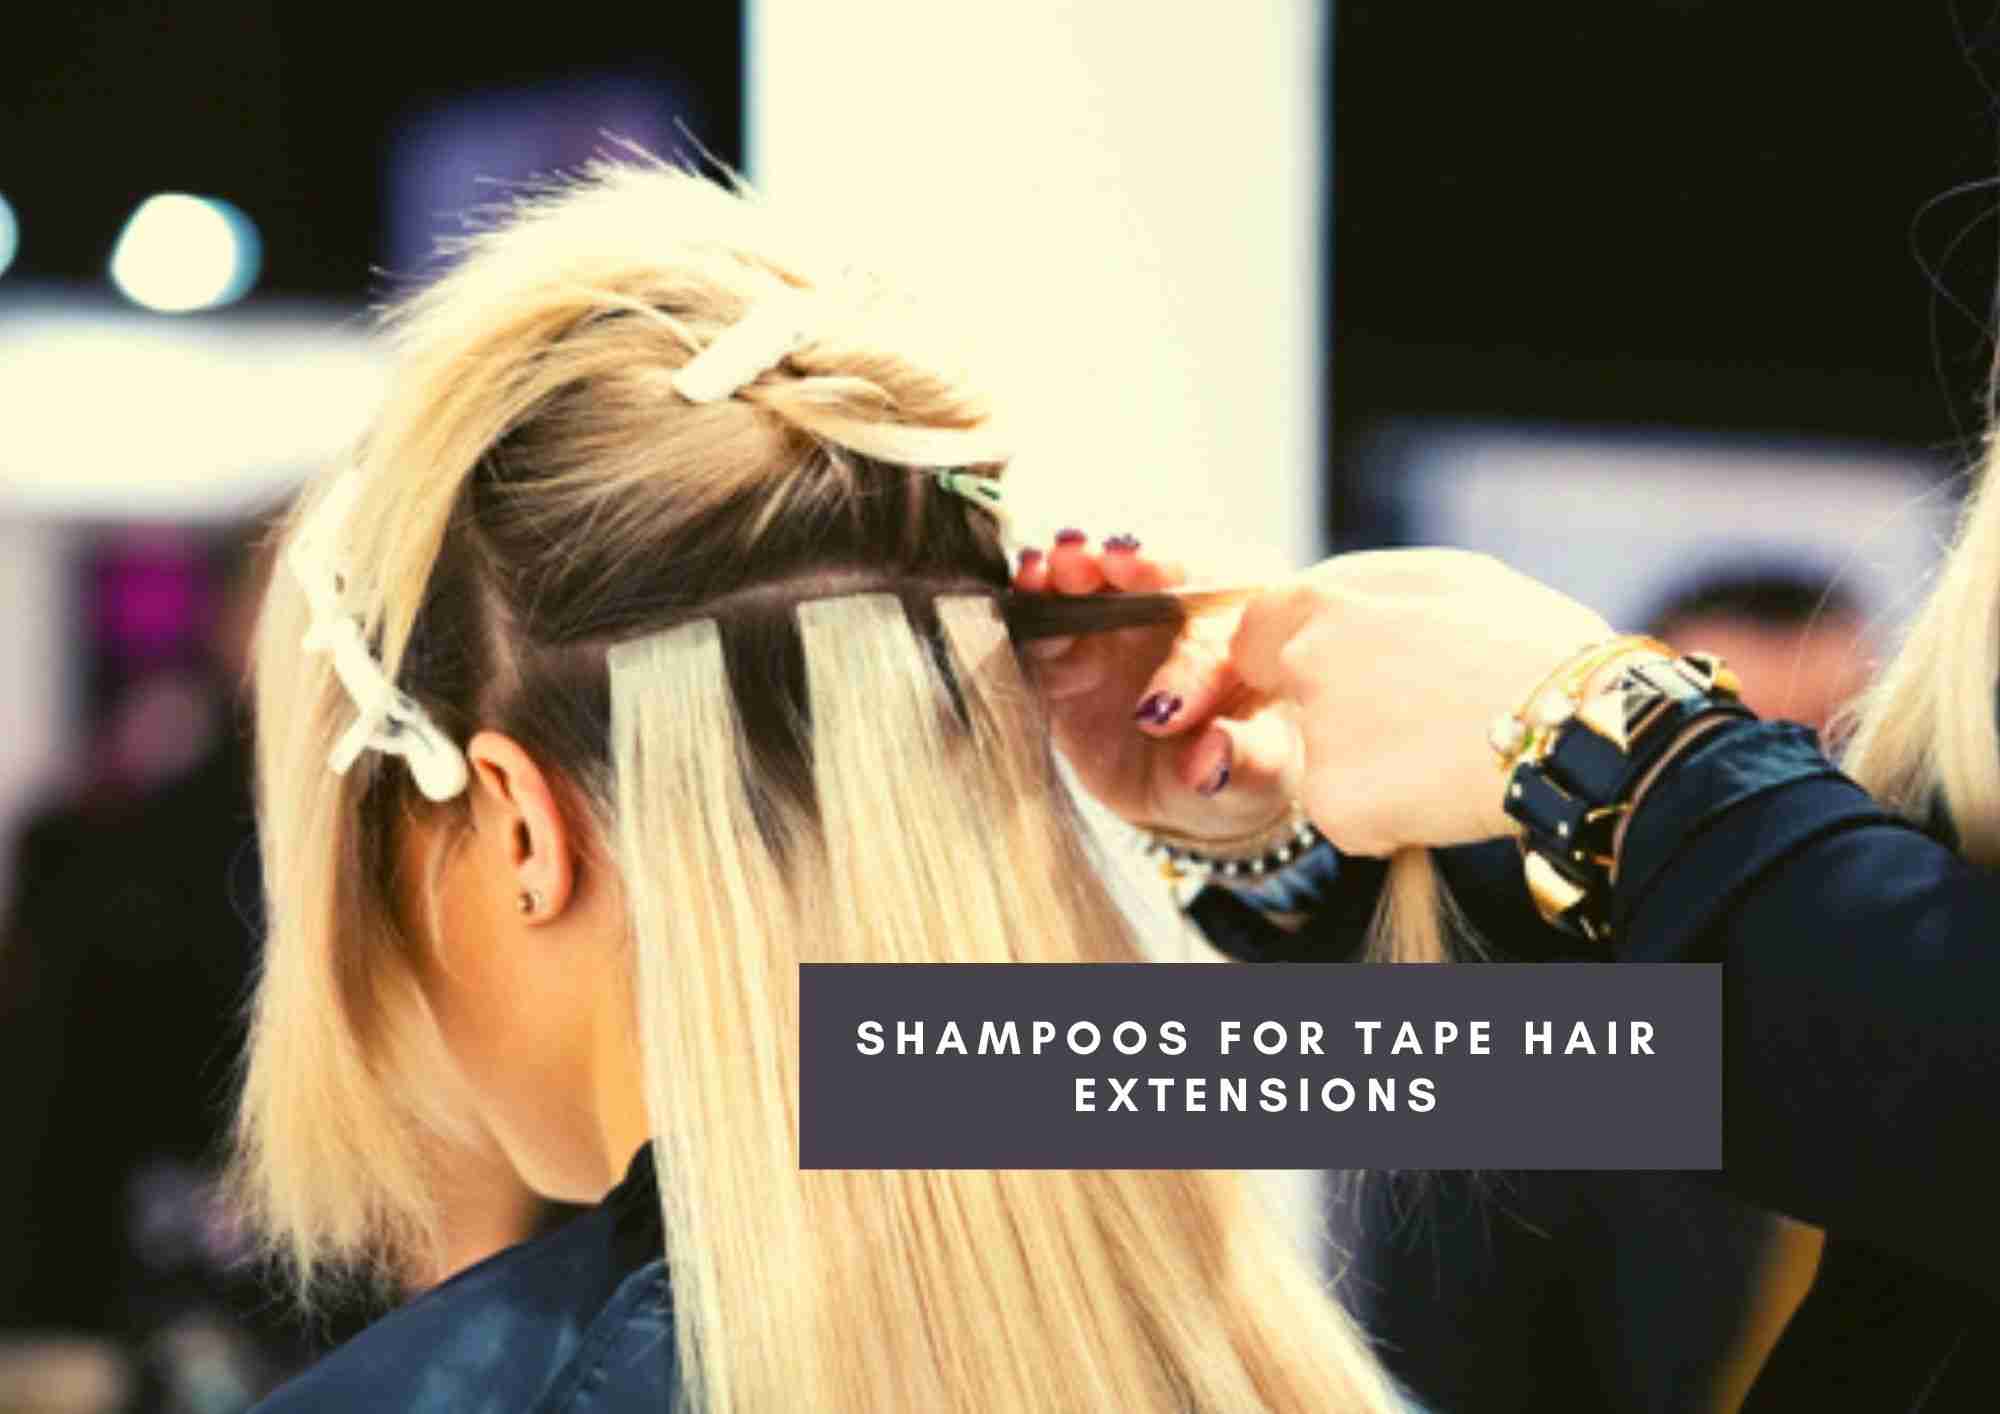 Best shampoo for tape extensions